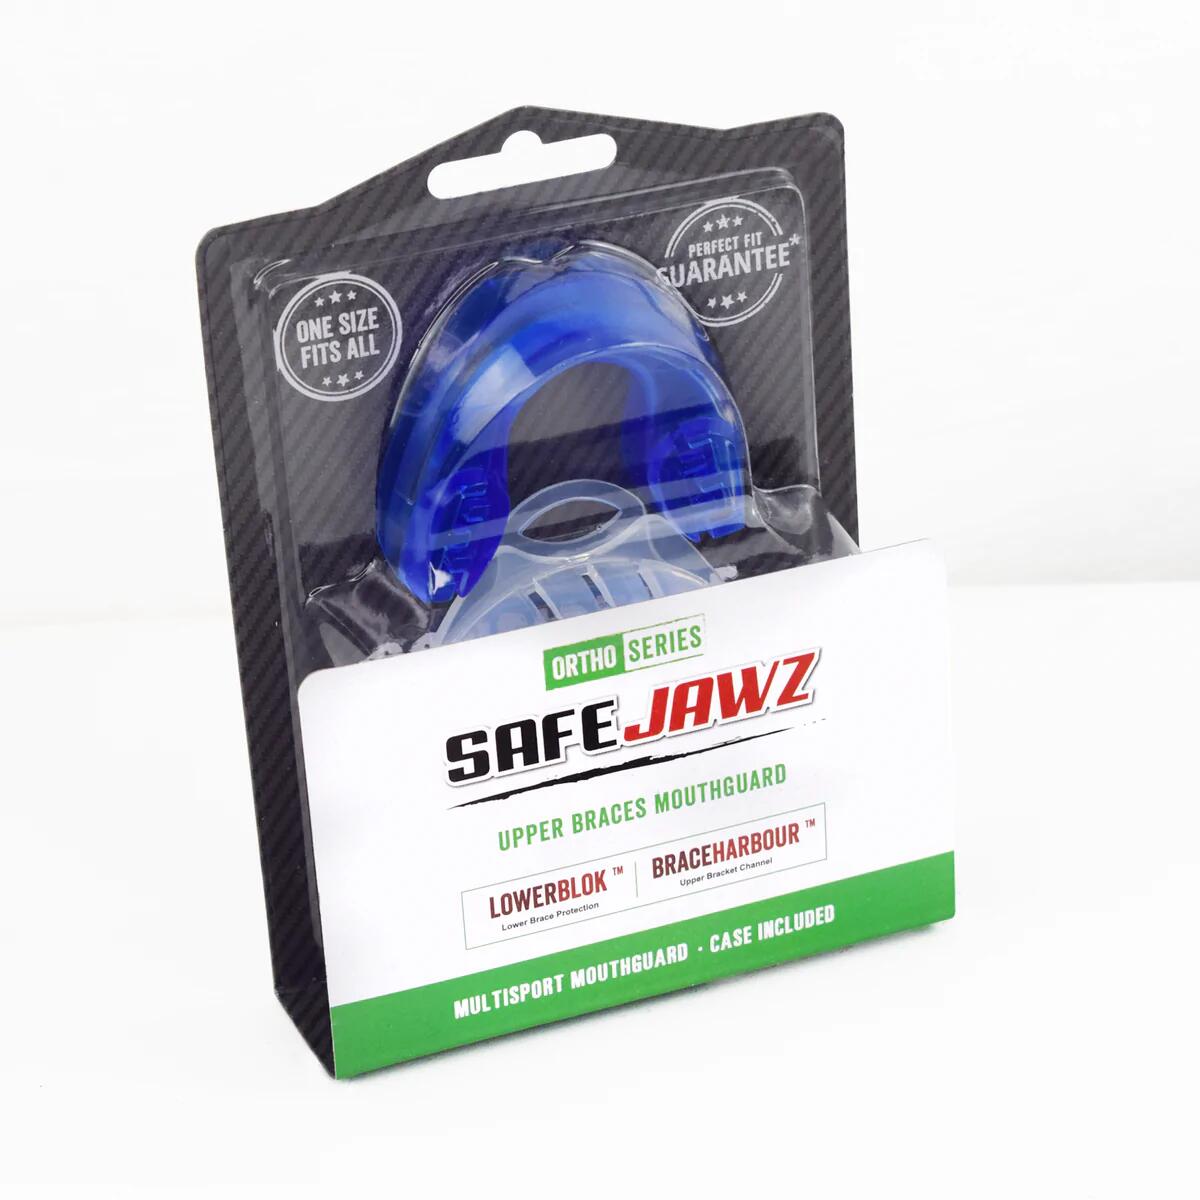 SAFEJAWZ Ortho Series Self-Fit Mouth Guard for Braces 5/6